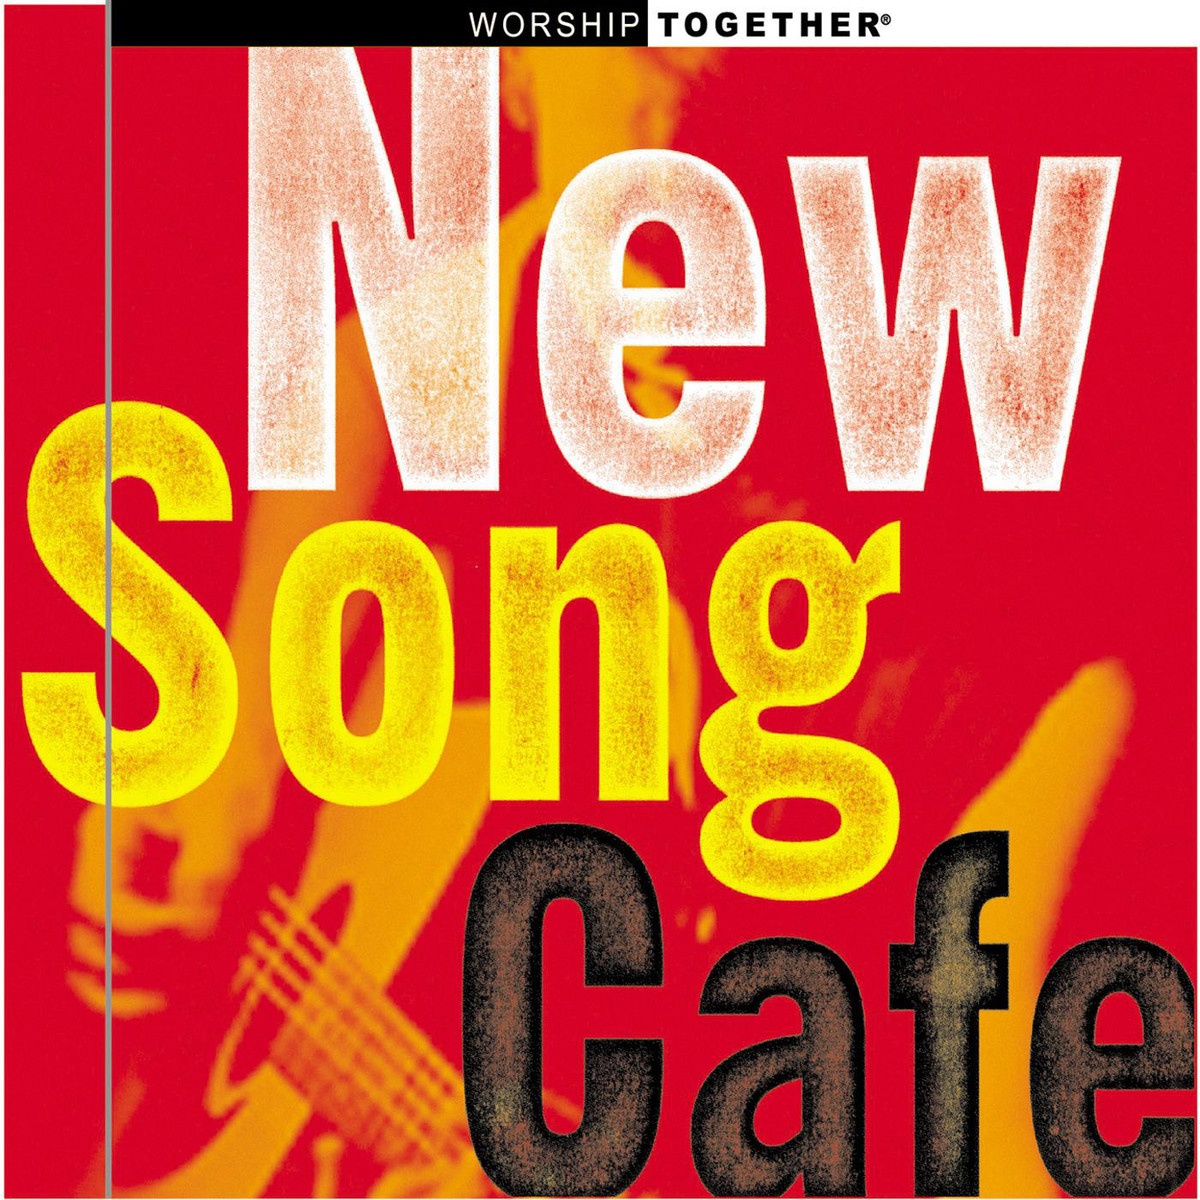 How I Long For You (New Song Cafe Album Version)